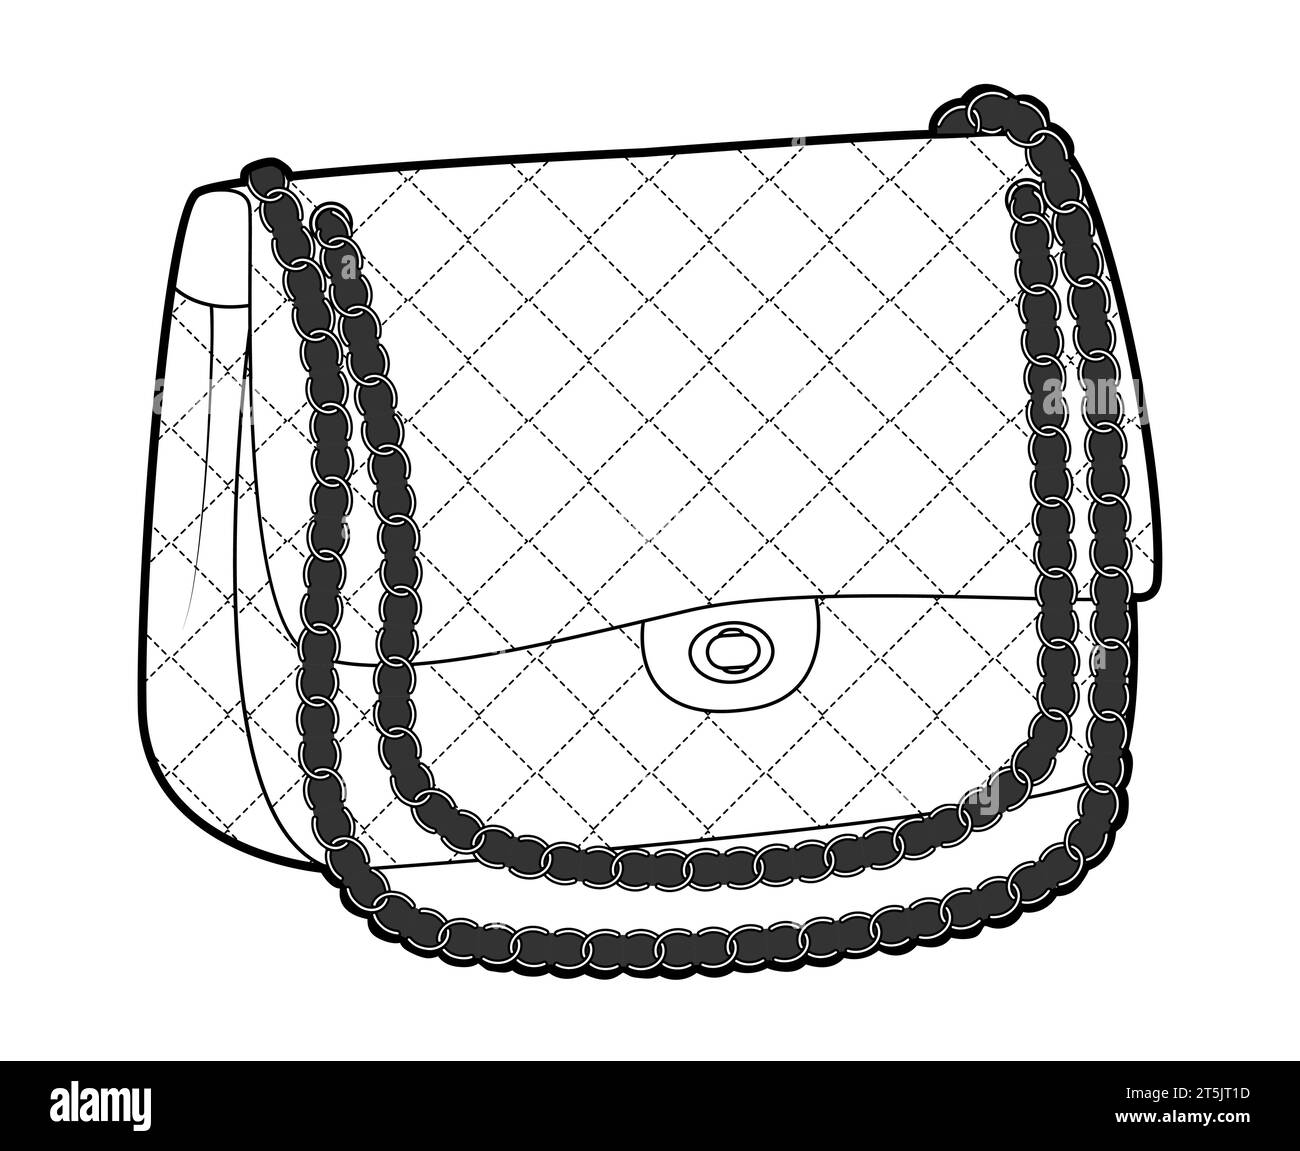 Handbag baguet silhouette bag. Fashion accessory technical illustration. Vector satchel rhombic stitching front 3-4 view for Men, women, unisex style, flat handbag CAD mockup sketch outline isolated Stock Vector